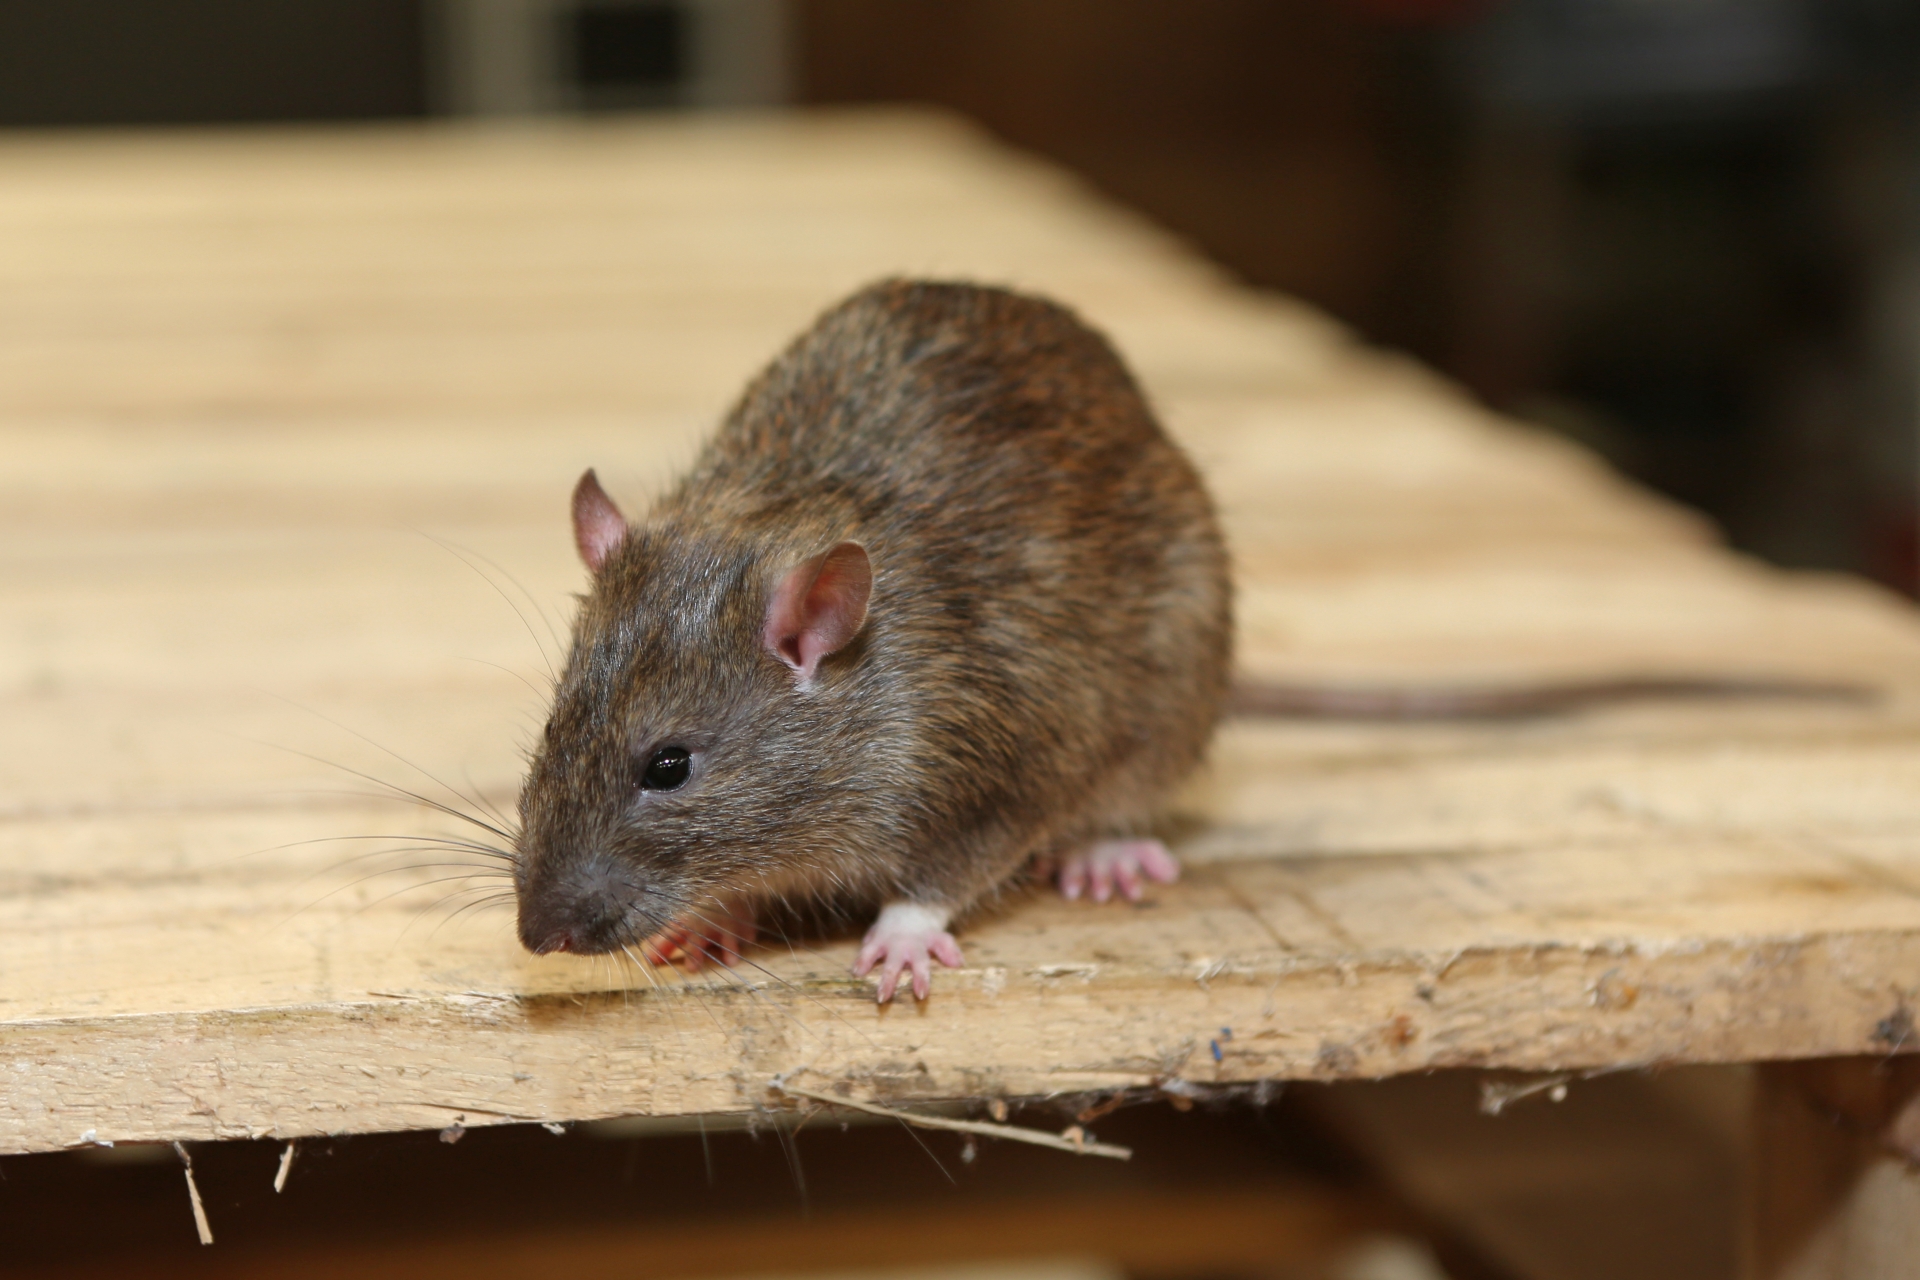 Rat Infestation, Pest Control in Camberwell, SE5. Call Now 020 8166 9746